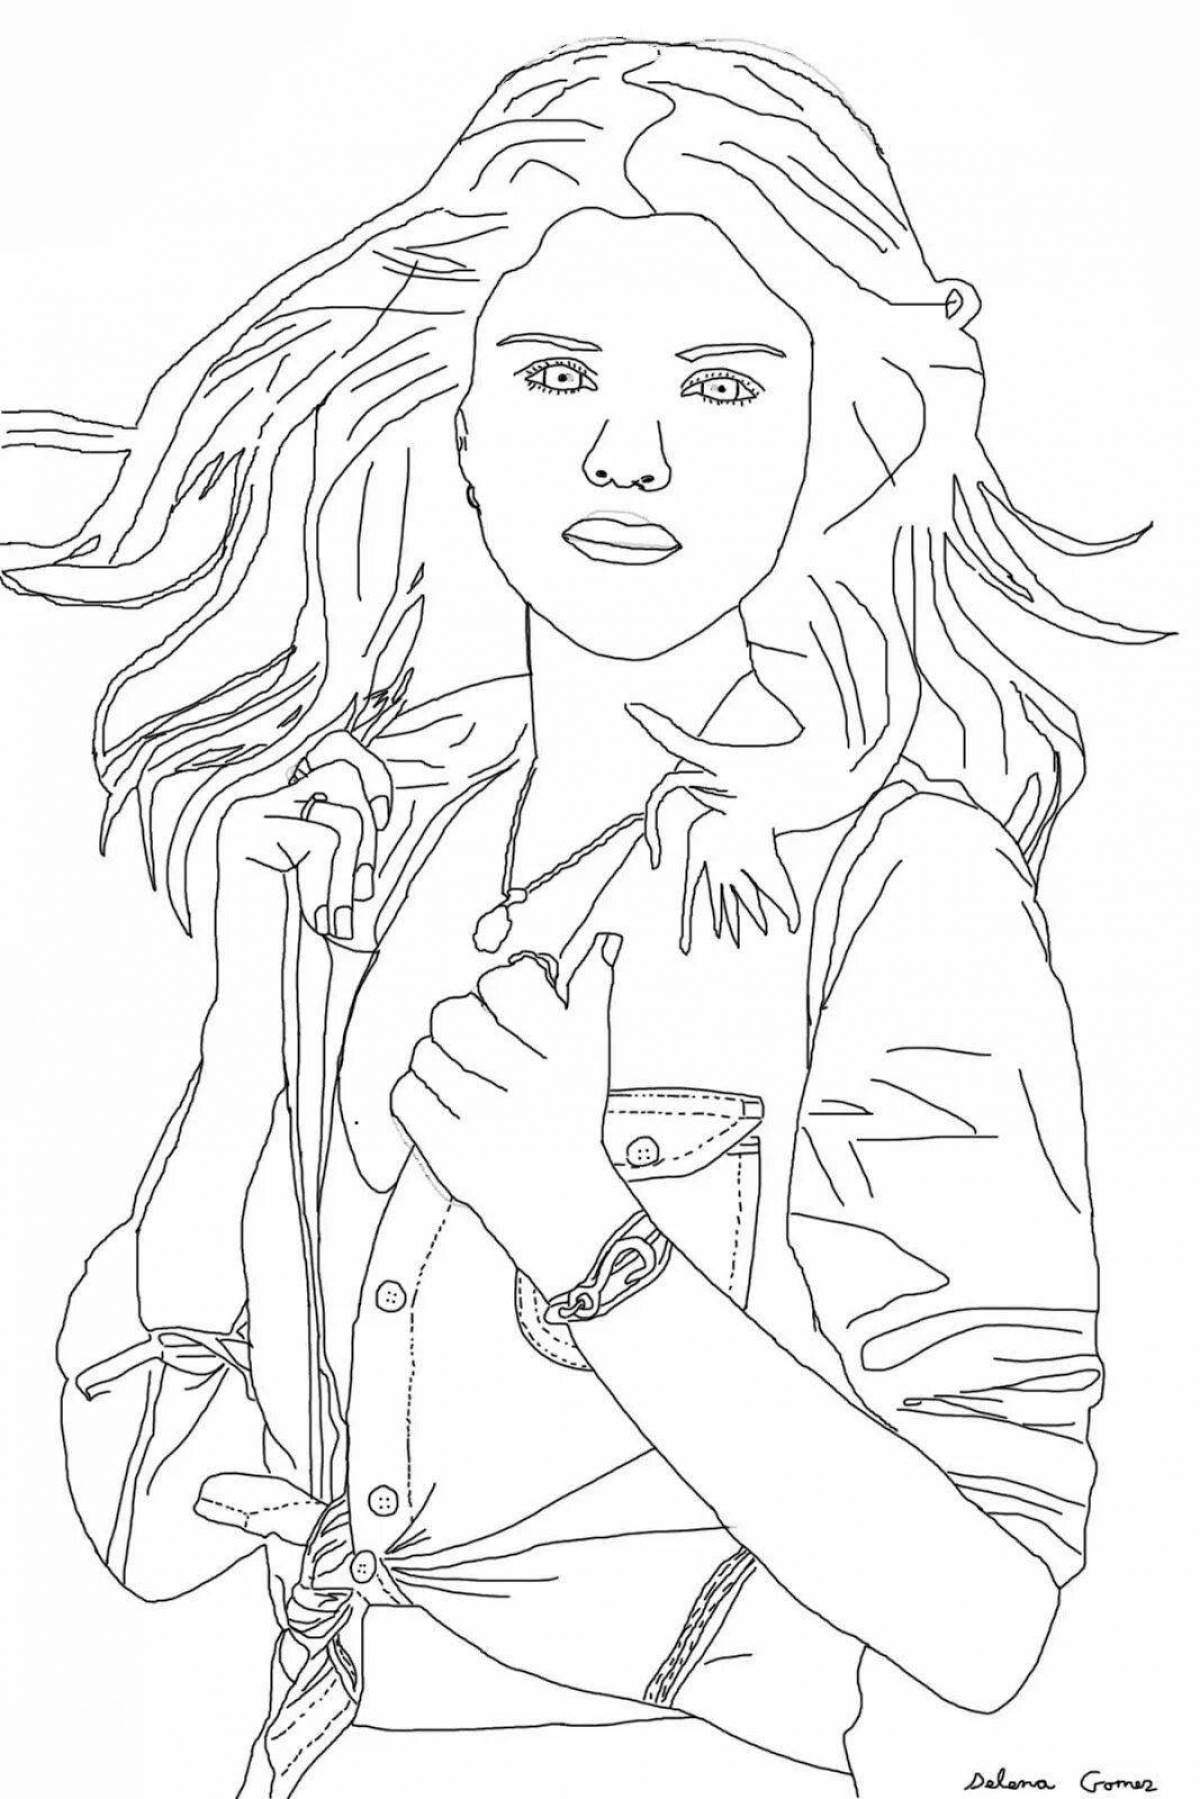 Glorious celebrity coloring pages